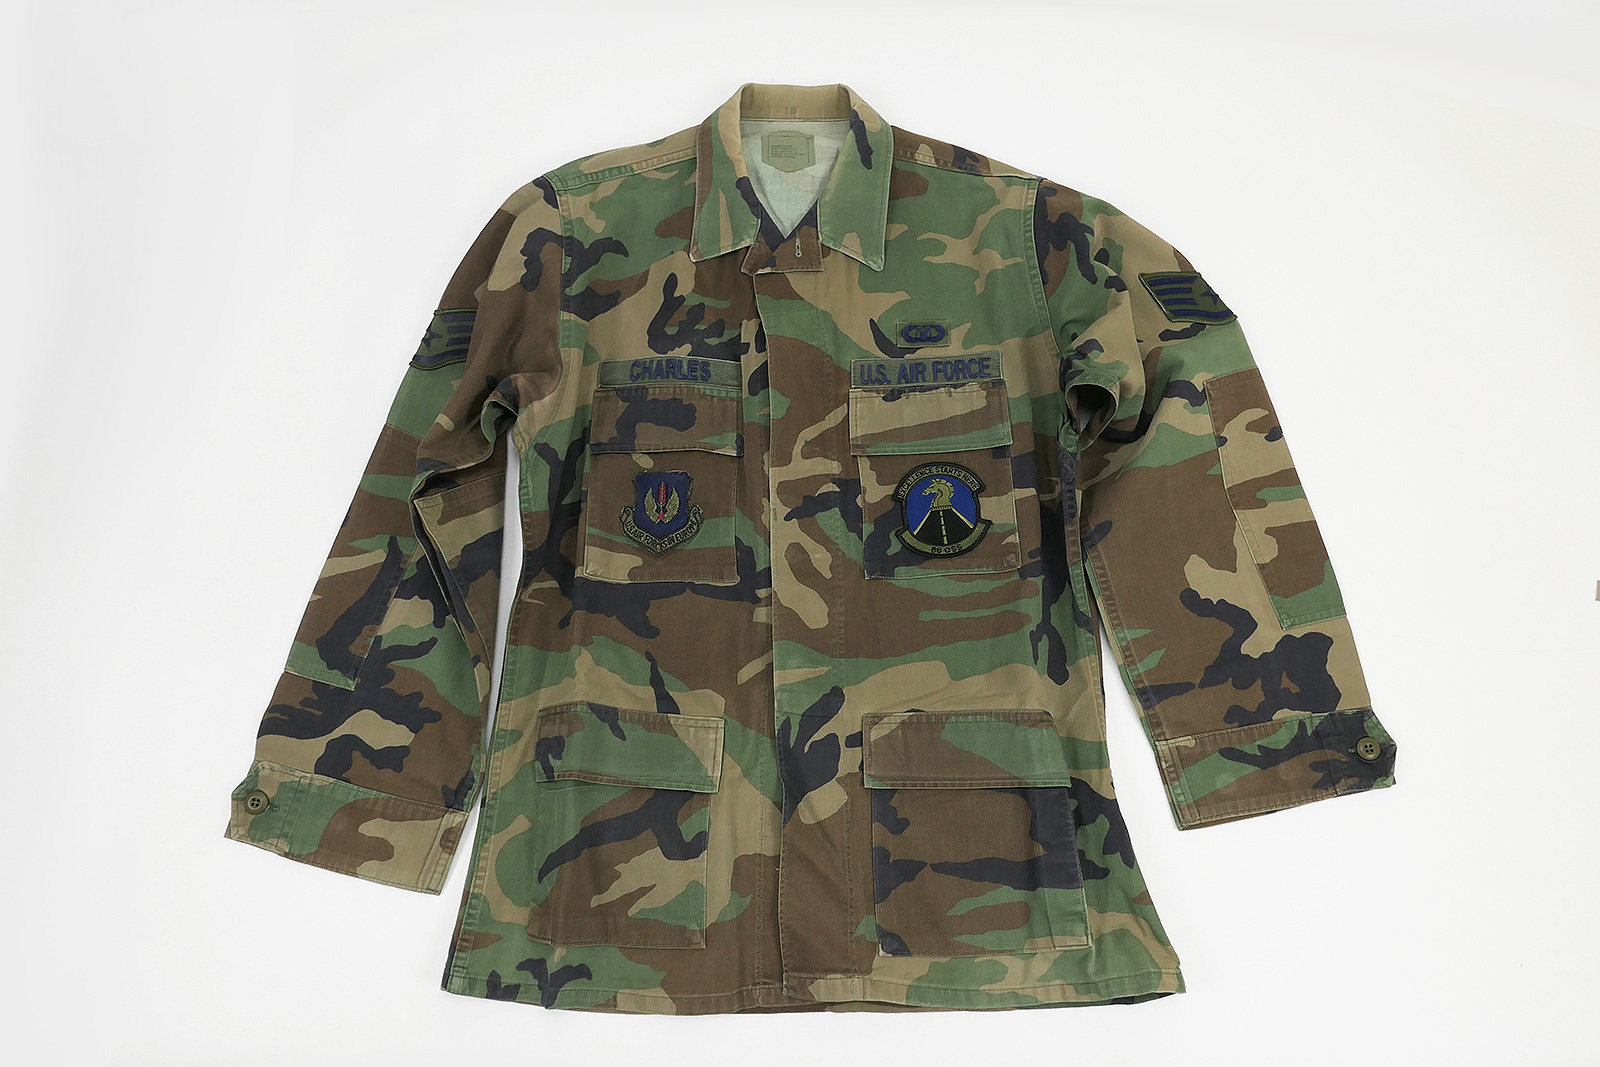 US Army BDU Woodland Field Jacket with Patches - Medium Regular | Lomax ...